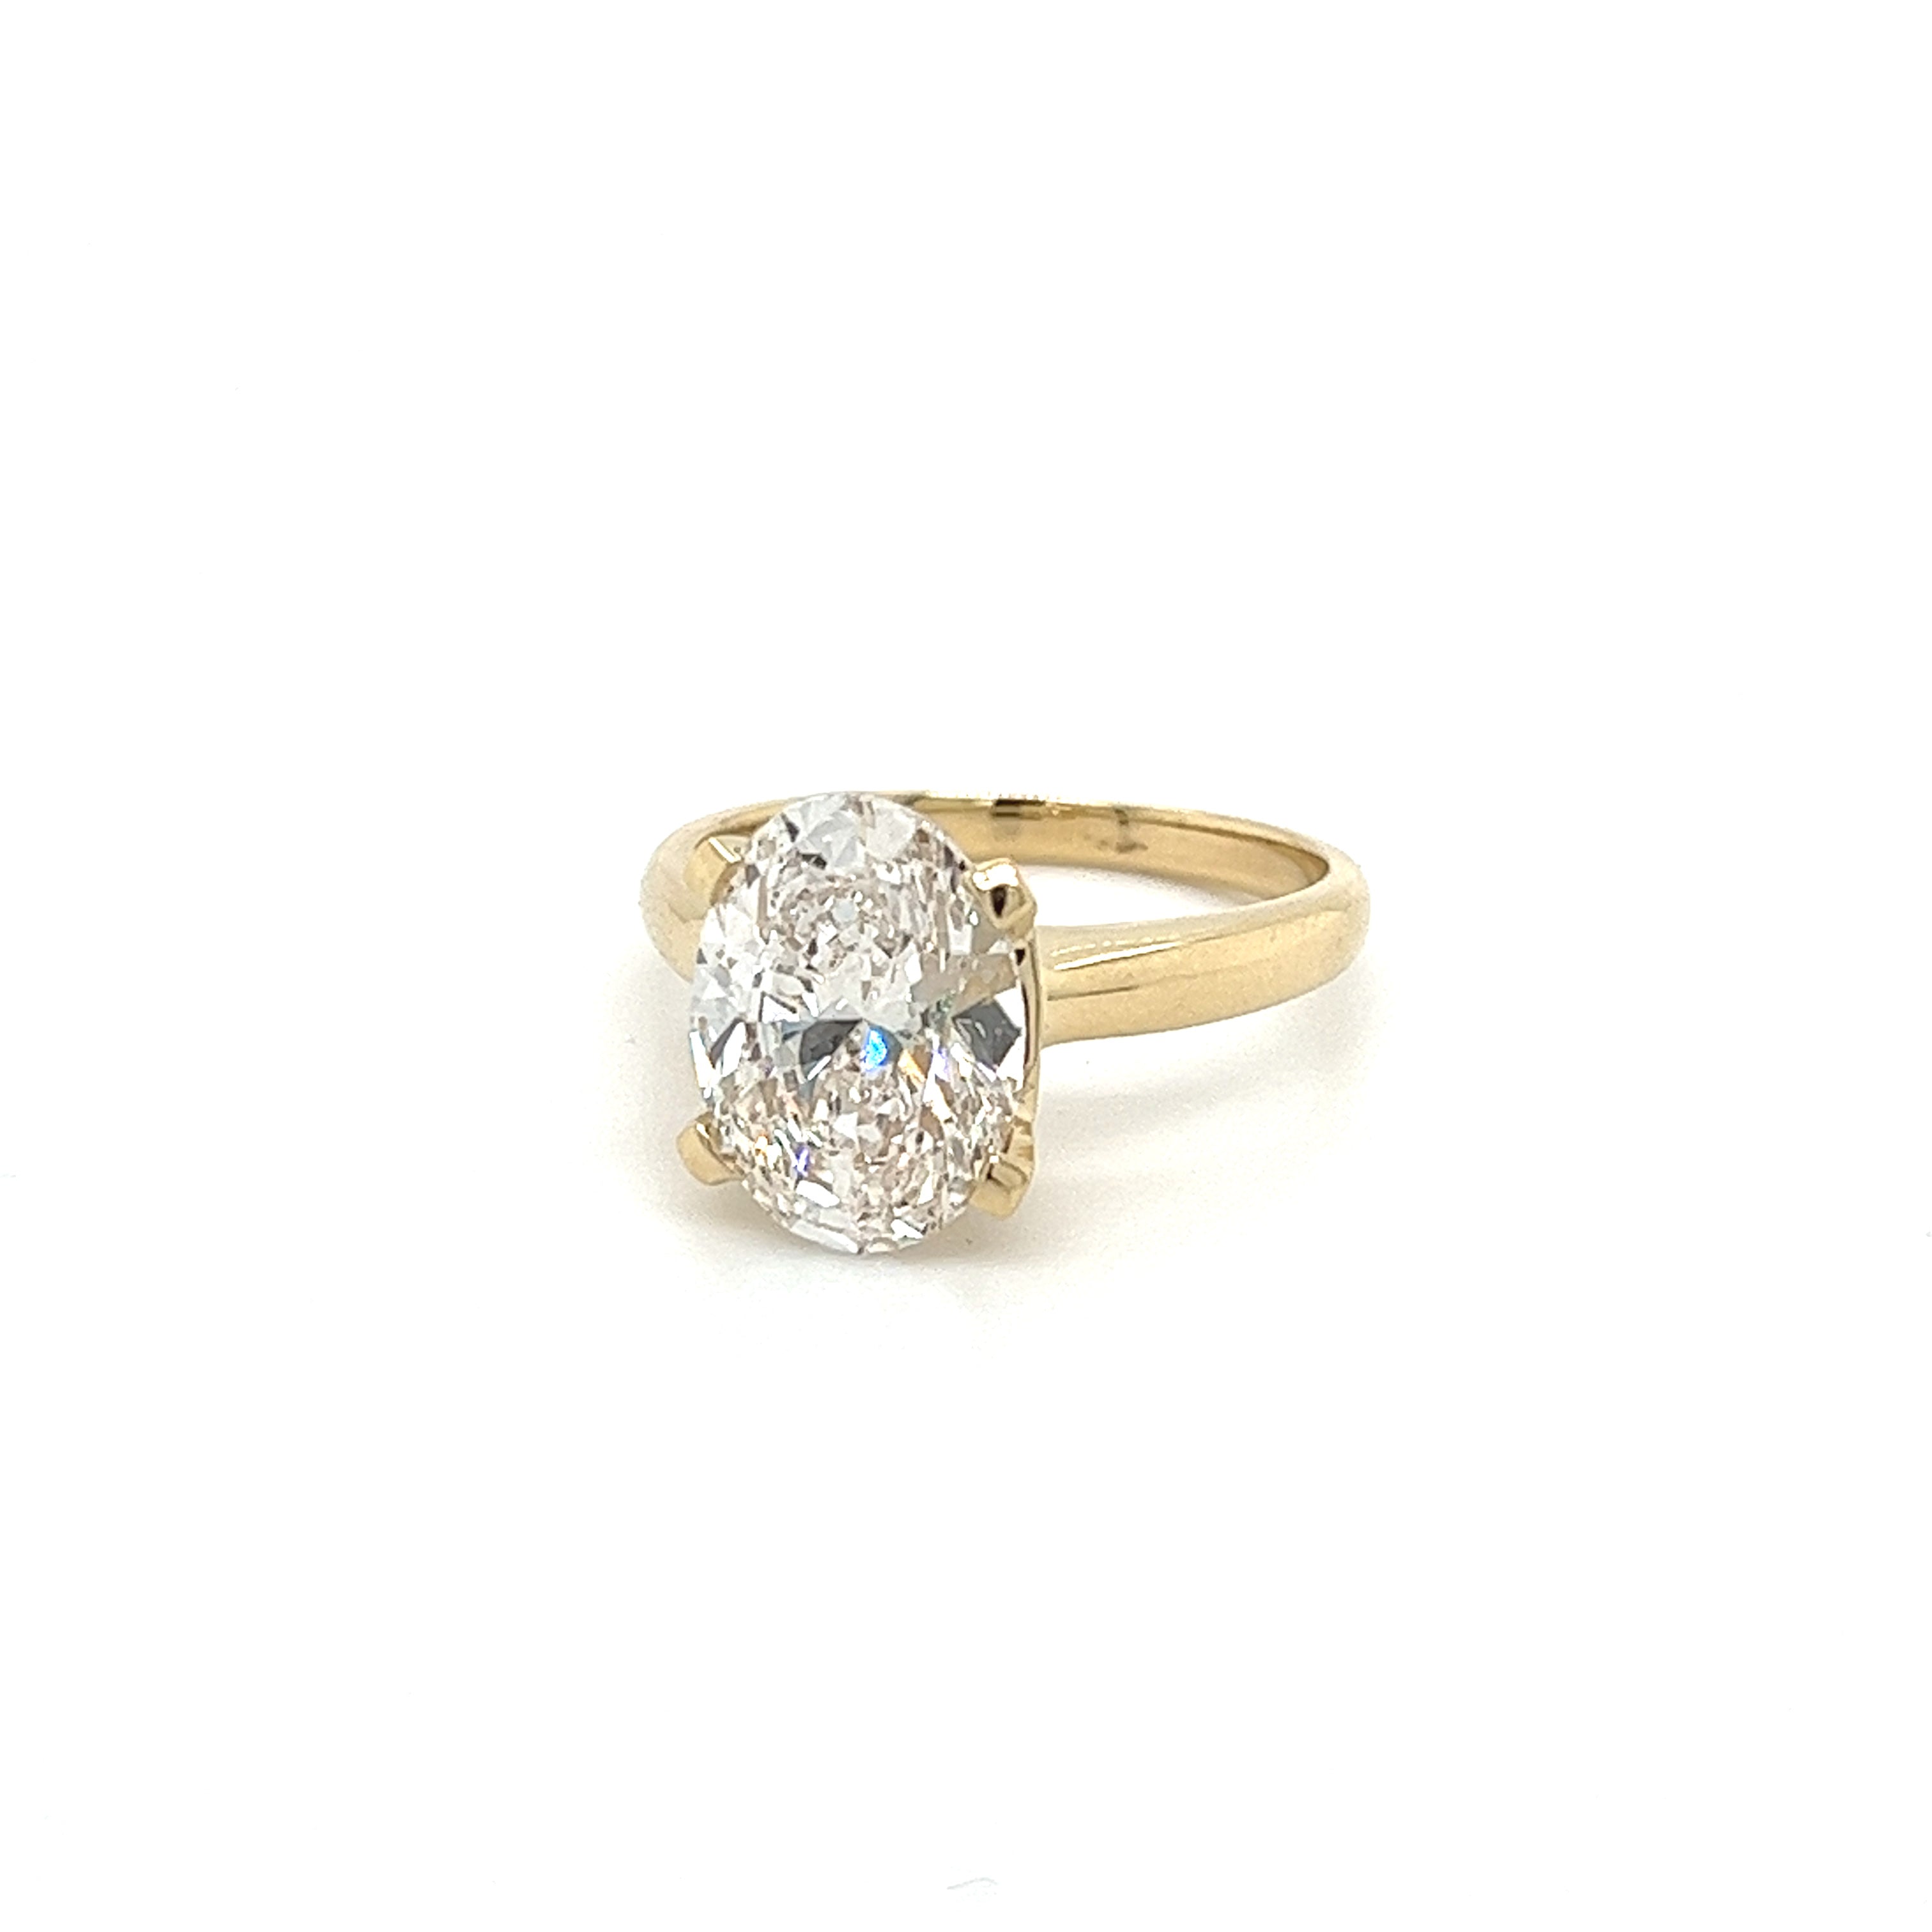 IGI-Certified-3_52-Carat-Oval-GVS1-Lab-Grown-Diamond-in-14k-Yellow-Gold-Solitaire-Ring-Rings.jpg